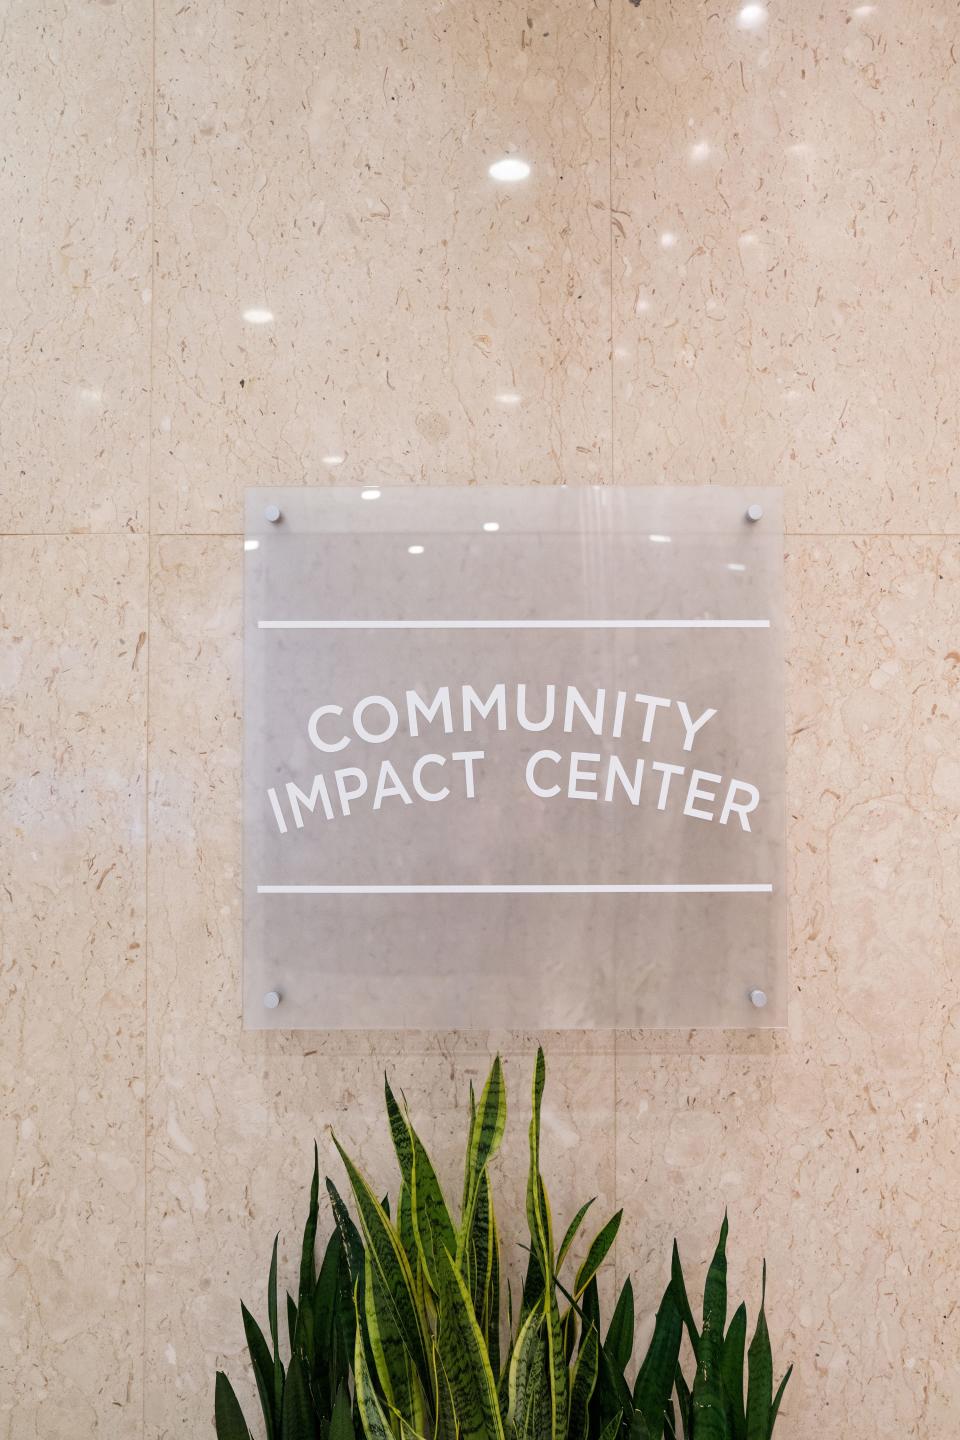 The Community Impact Center at 215 N. Front Street will house about a dozen nonprofits after serving for years as a Nationwide office building.